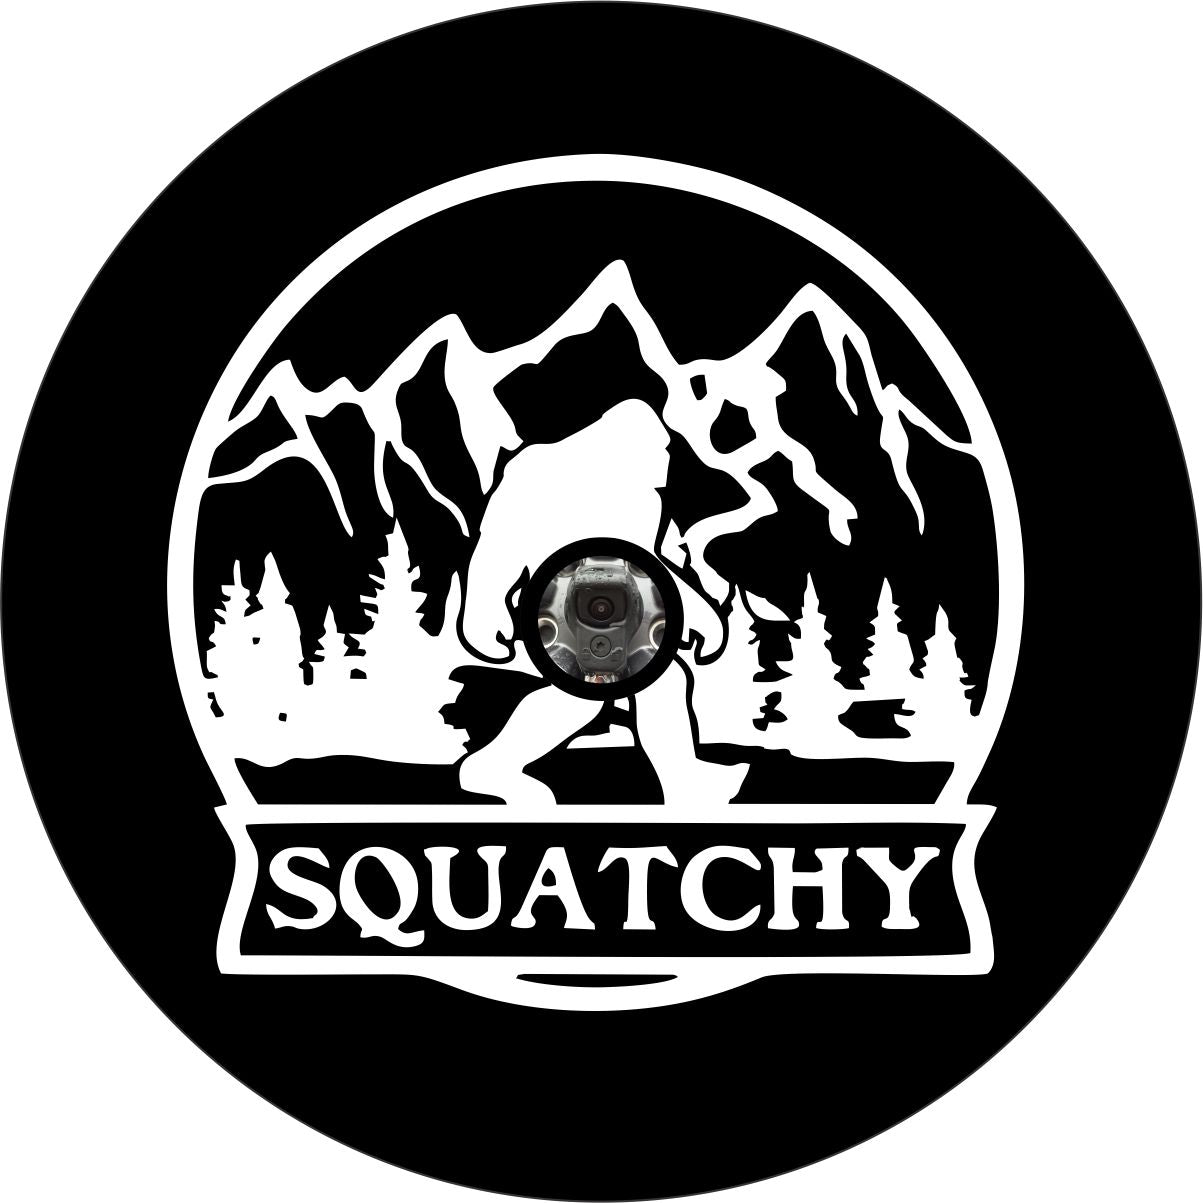 Spare tire cover design of a silhouette of sasquatch walking in the mountains with the word squatchy and a hole for a back up camera.